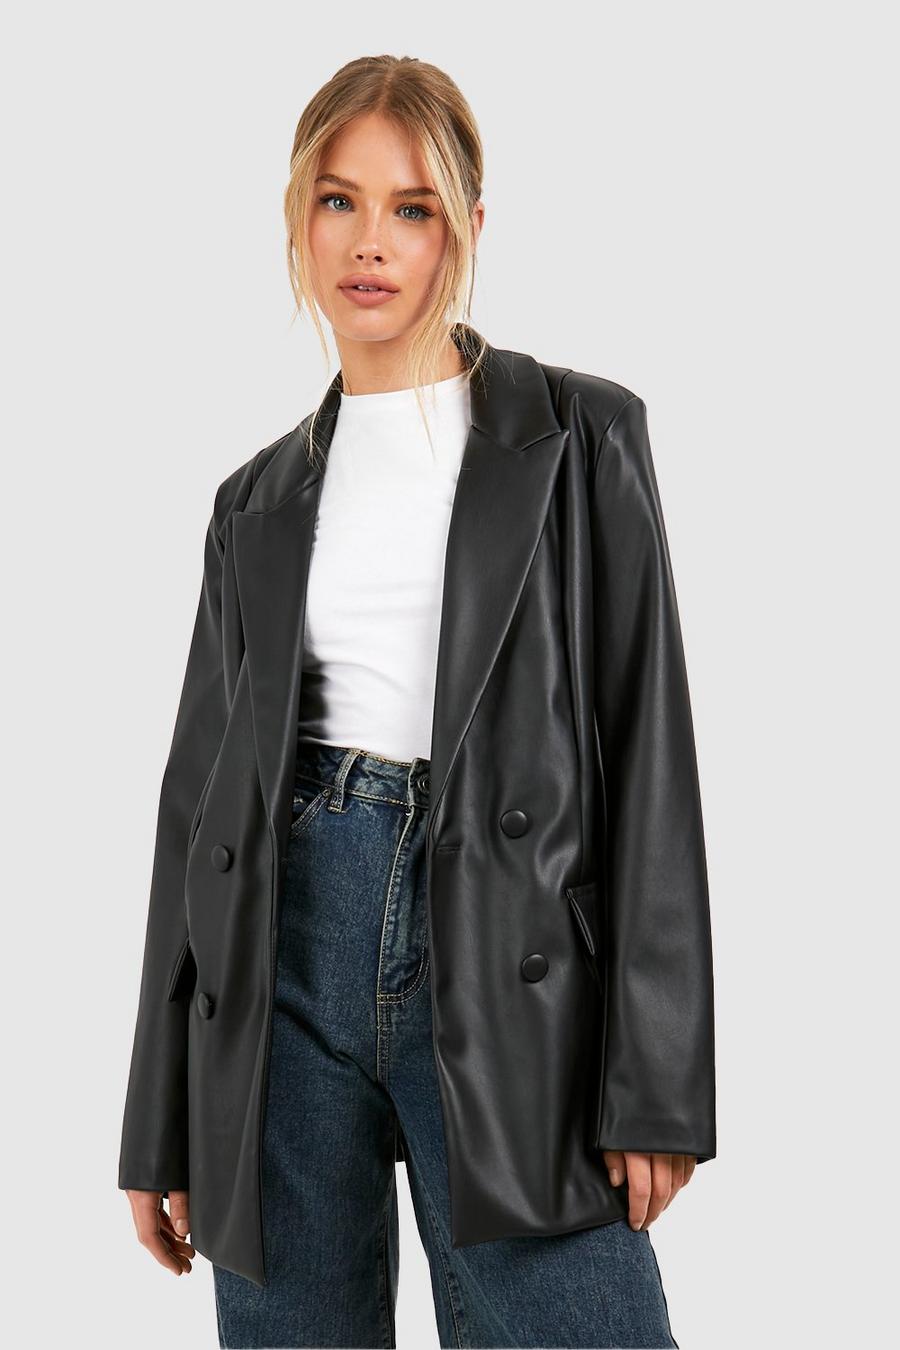 Black Leather Look Double Breasted Relaxed Fit Blazer